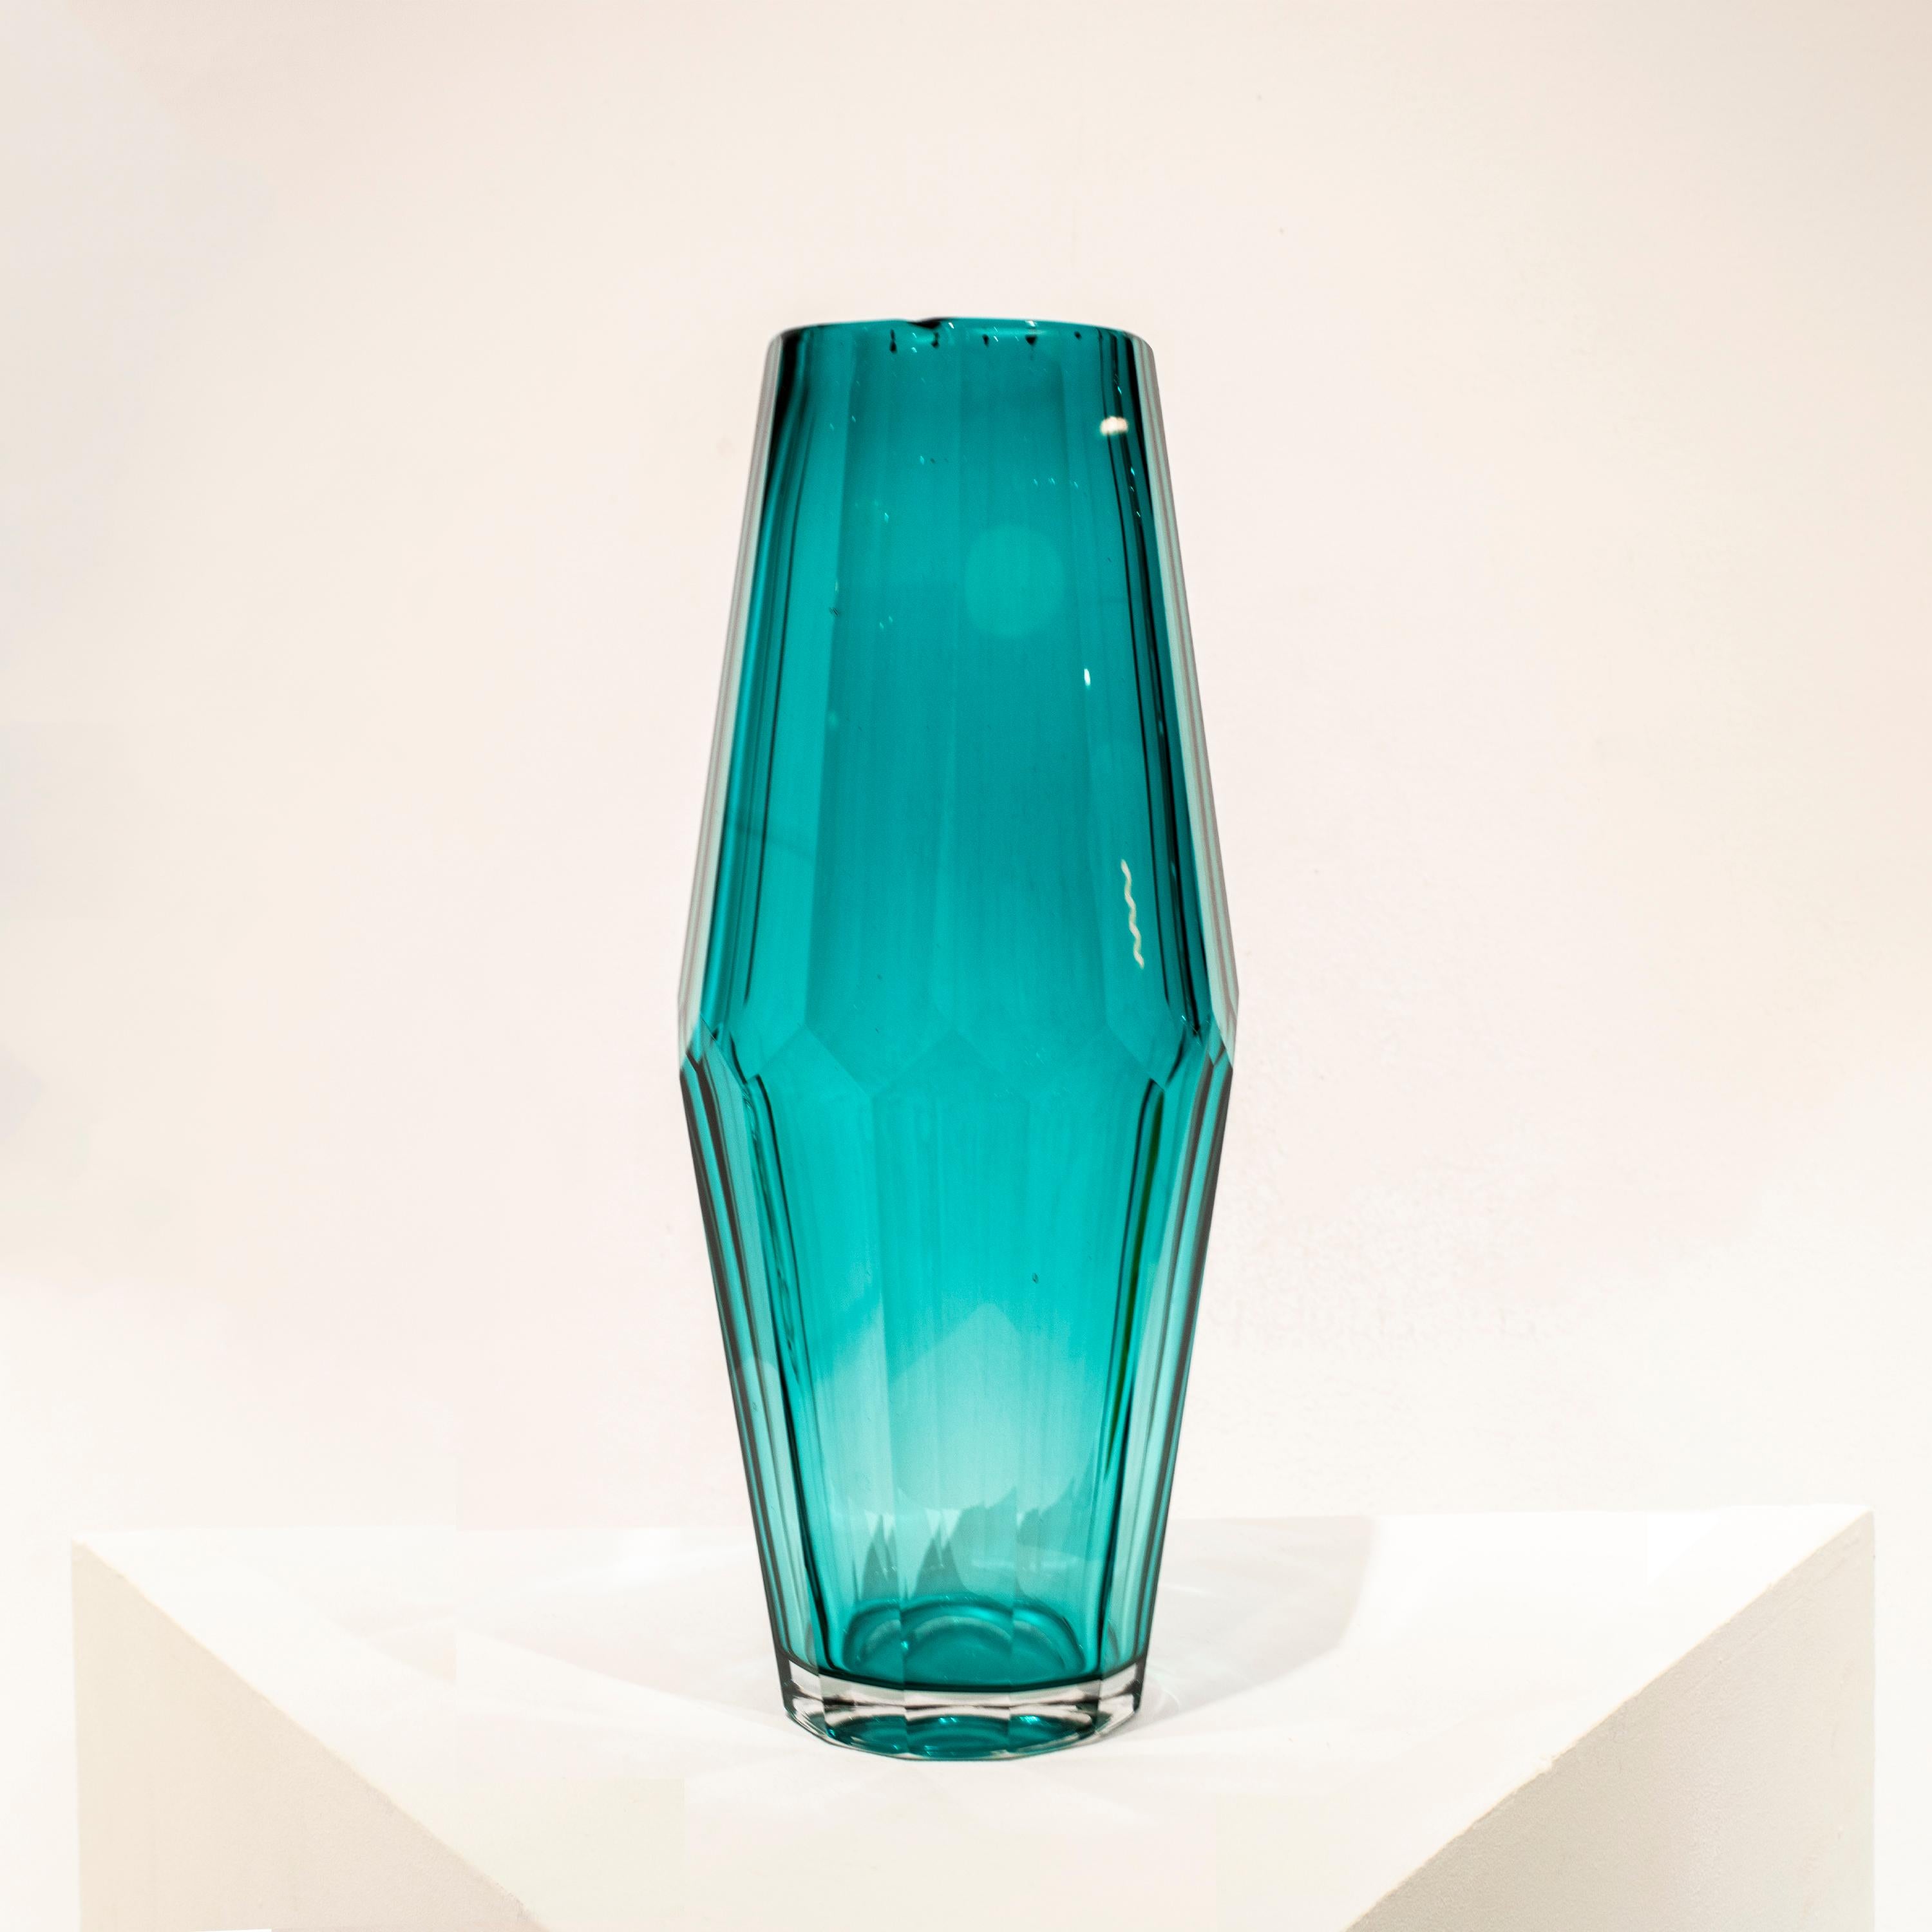 Hand-blown Italian blue semi-transparent glass vase, with a faceted shape.